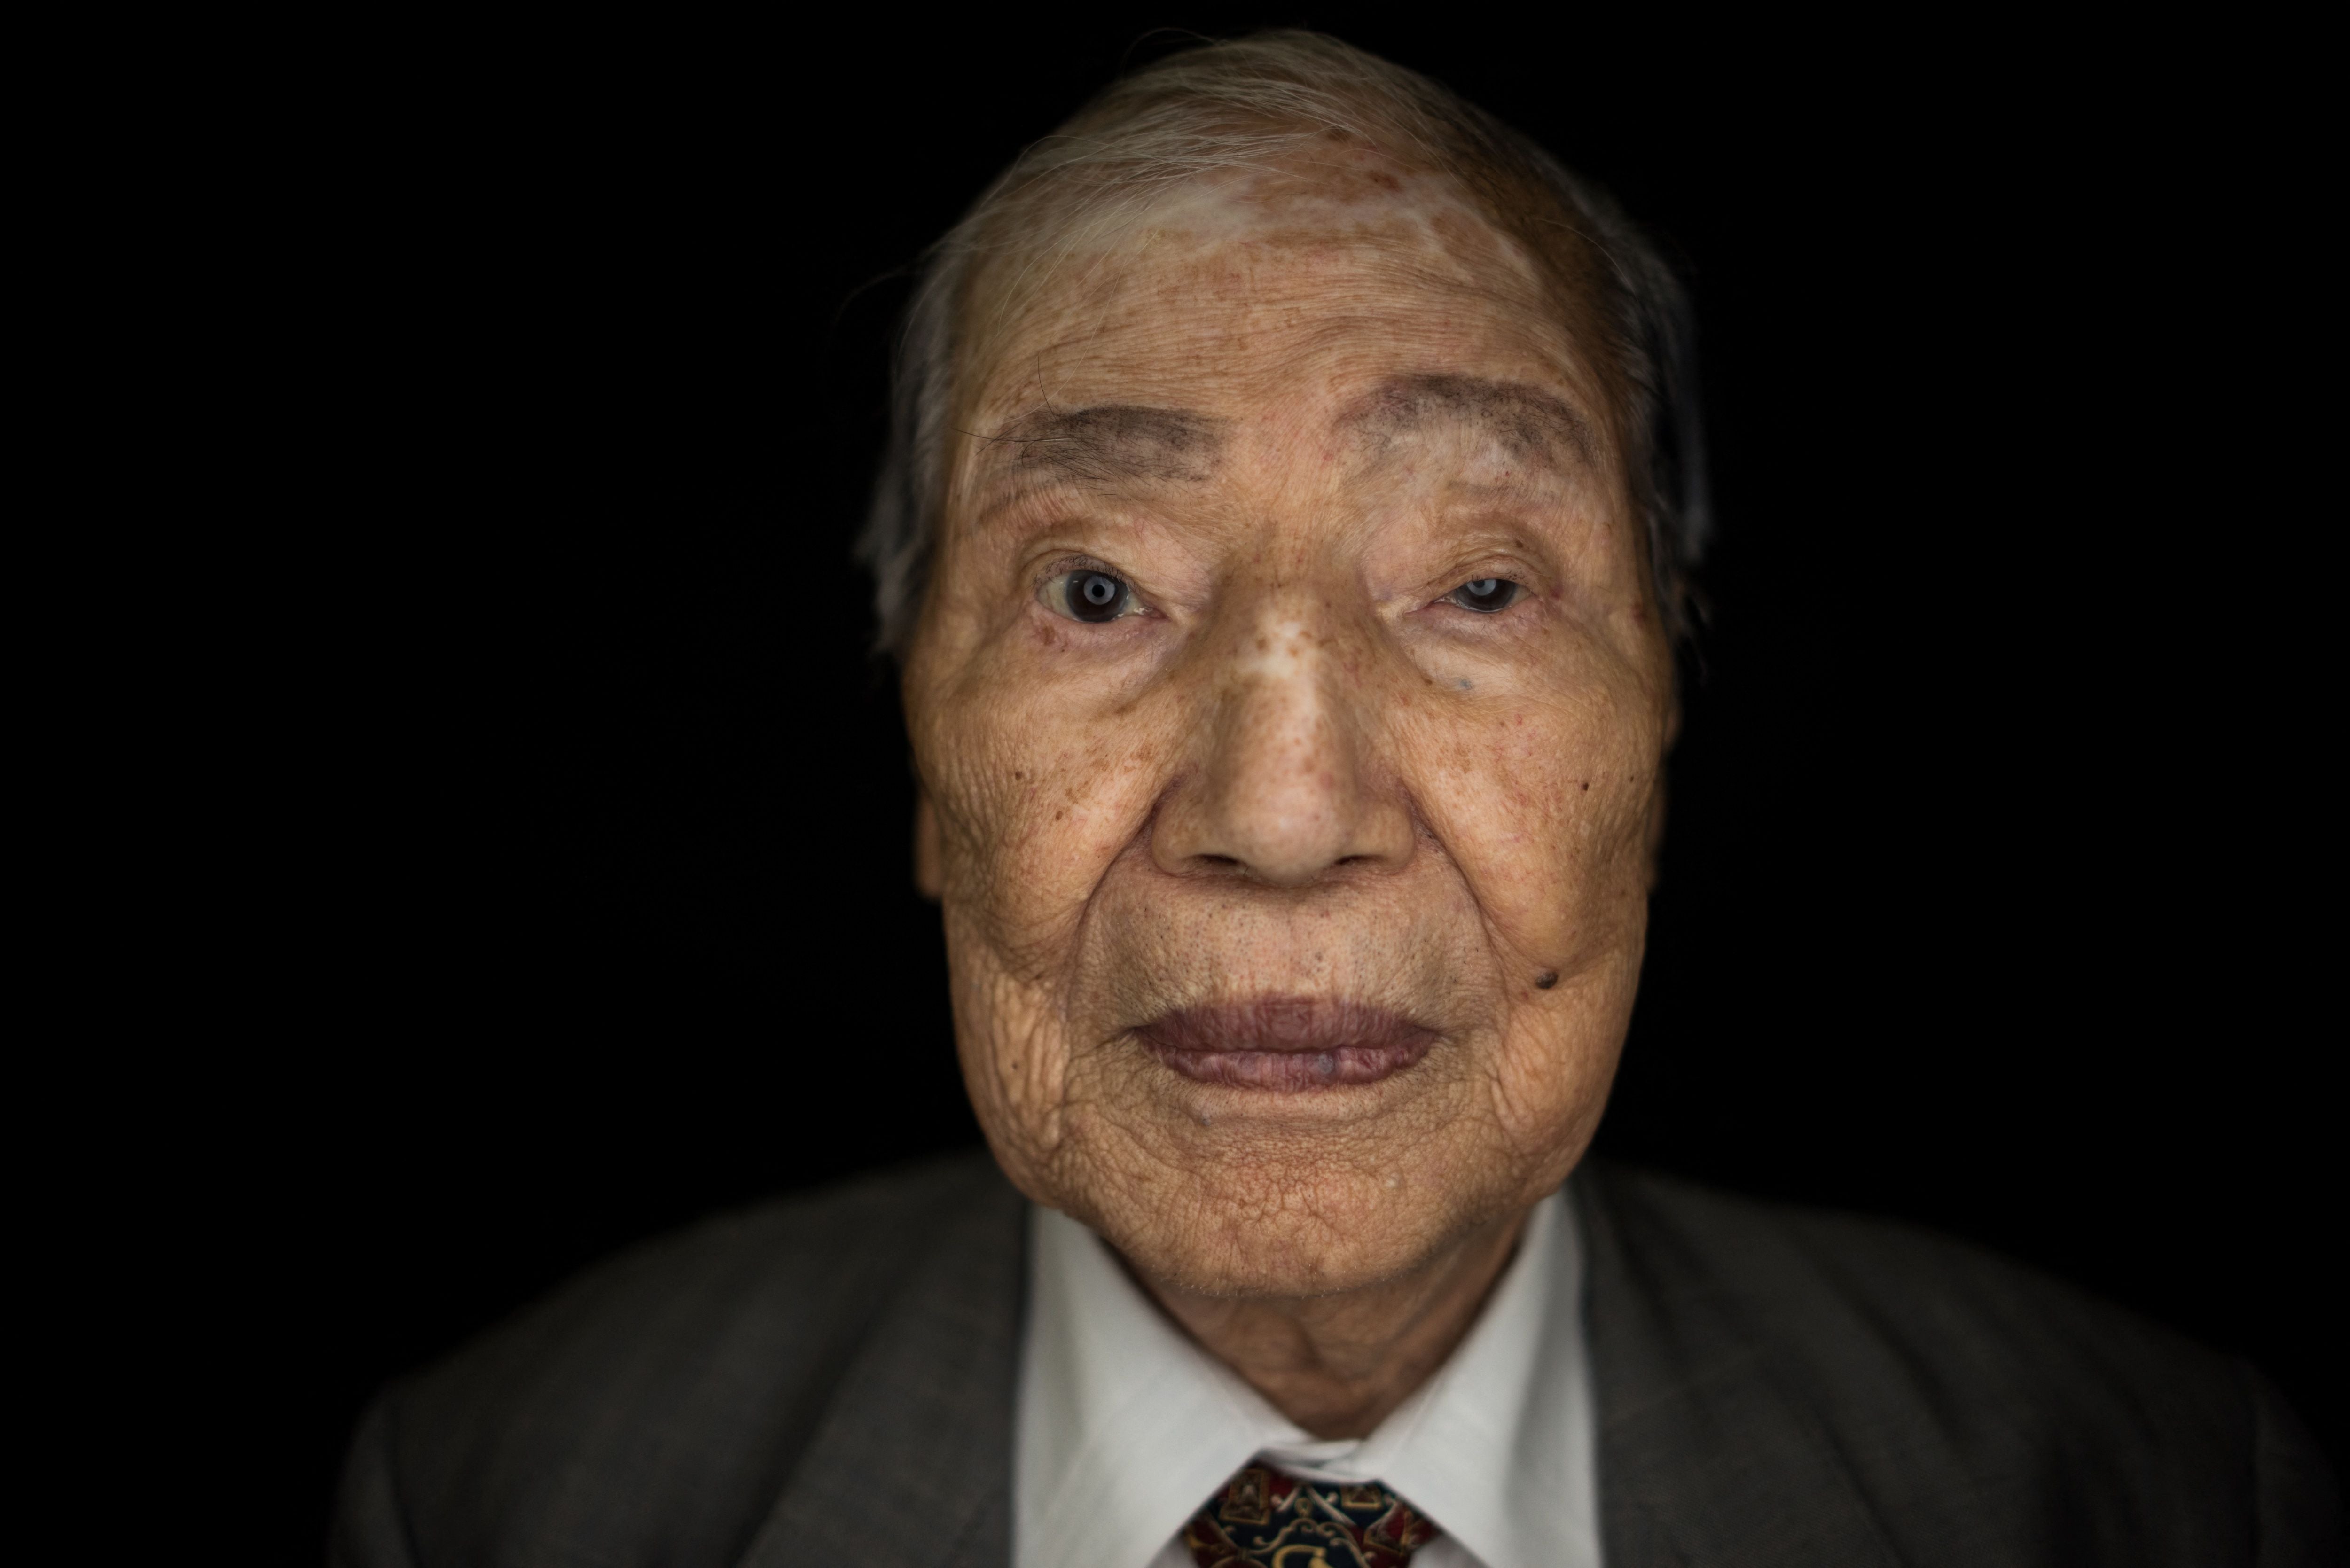 ‘I saw tens of thousands of bodies everywhere,’ said Tsuboi, ‘all burned and dead. I saw such terrible things’